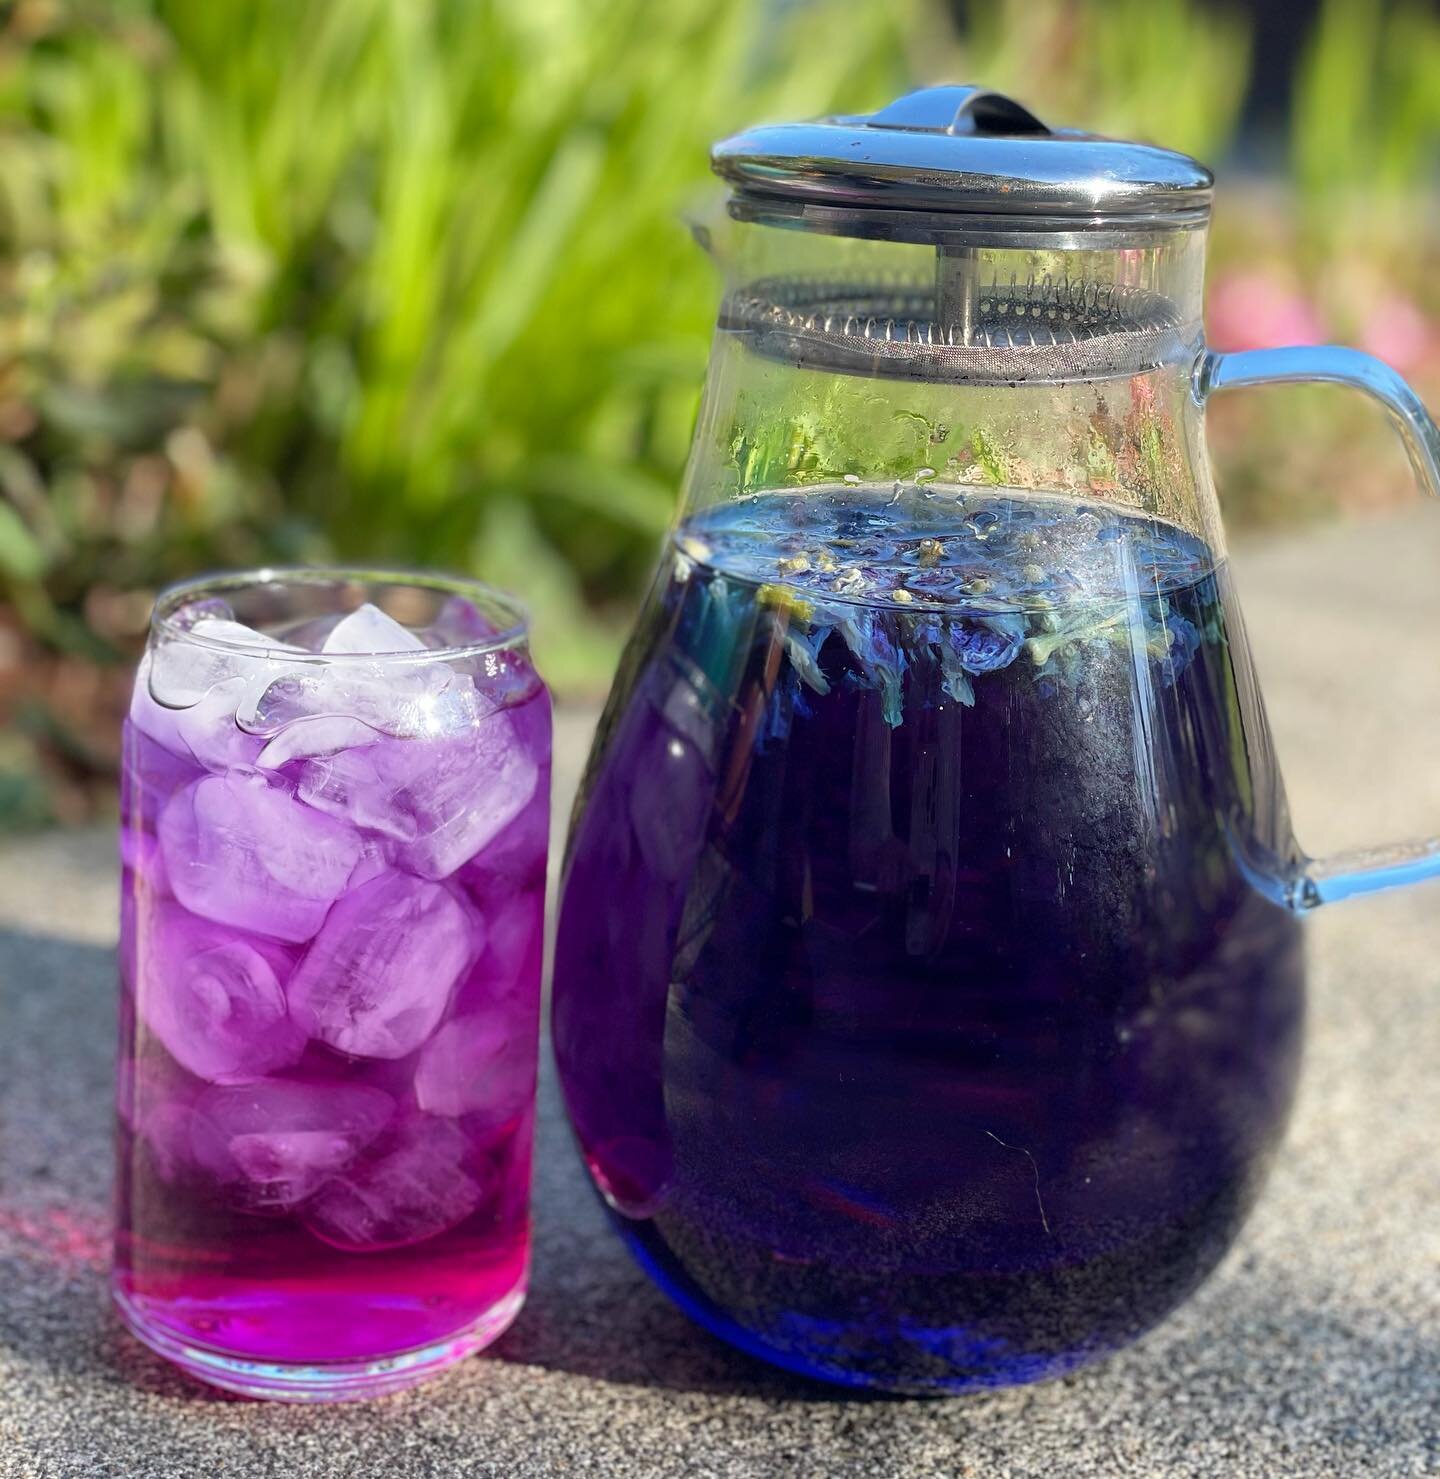 Cosmic Lemonade 🍋💜

So nice to take a moment just sitting on my front porch and drinking some lemonade!

This one is simple, our Butterfly Pea Flower (available in the Spring Spice Kit) and some lemon juice or citric crystals... if desired you can 